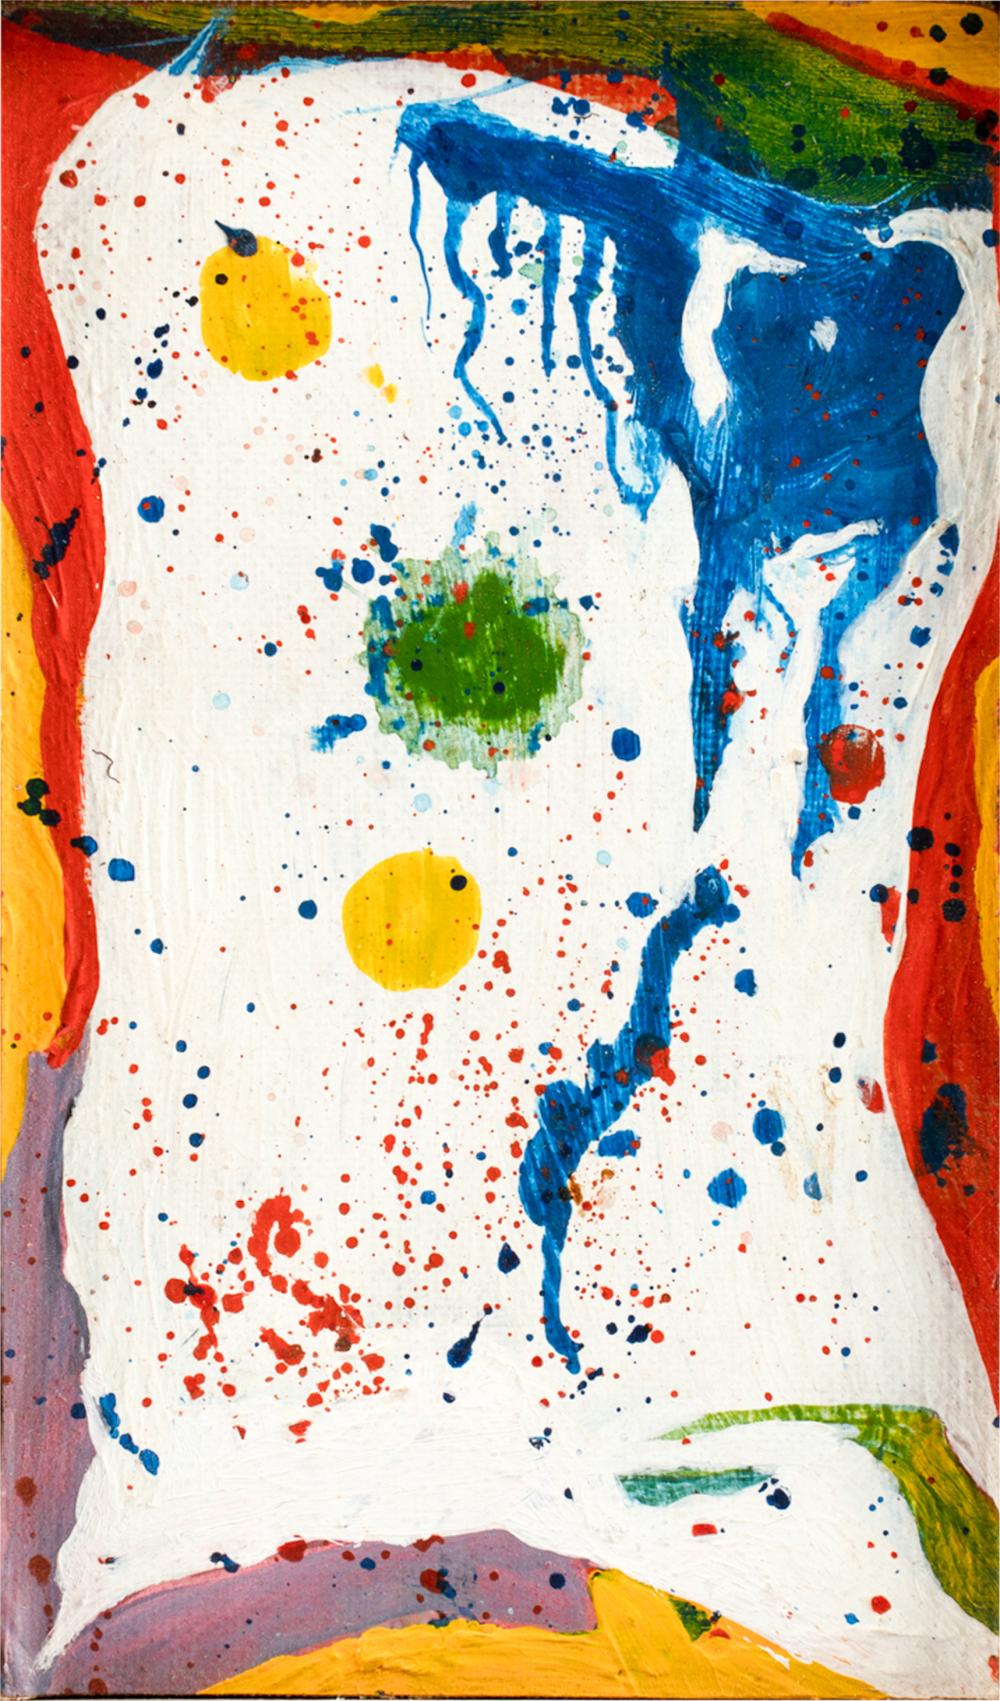 ATTRIBUTED TO SAM FRANCIS (1923